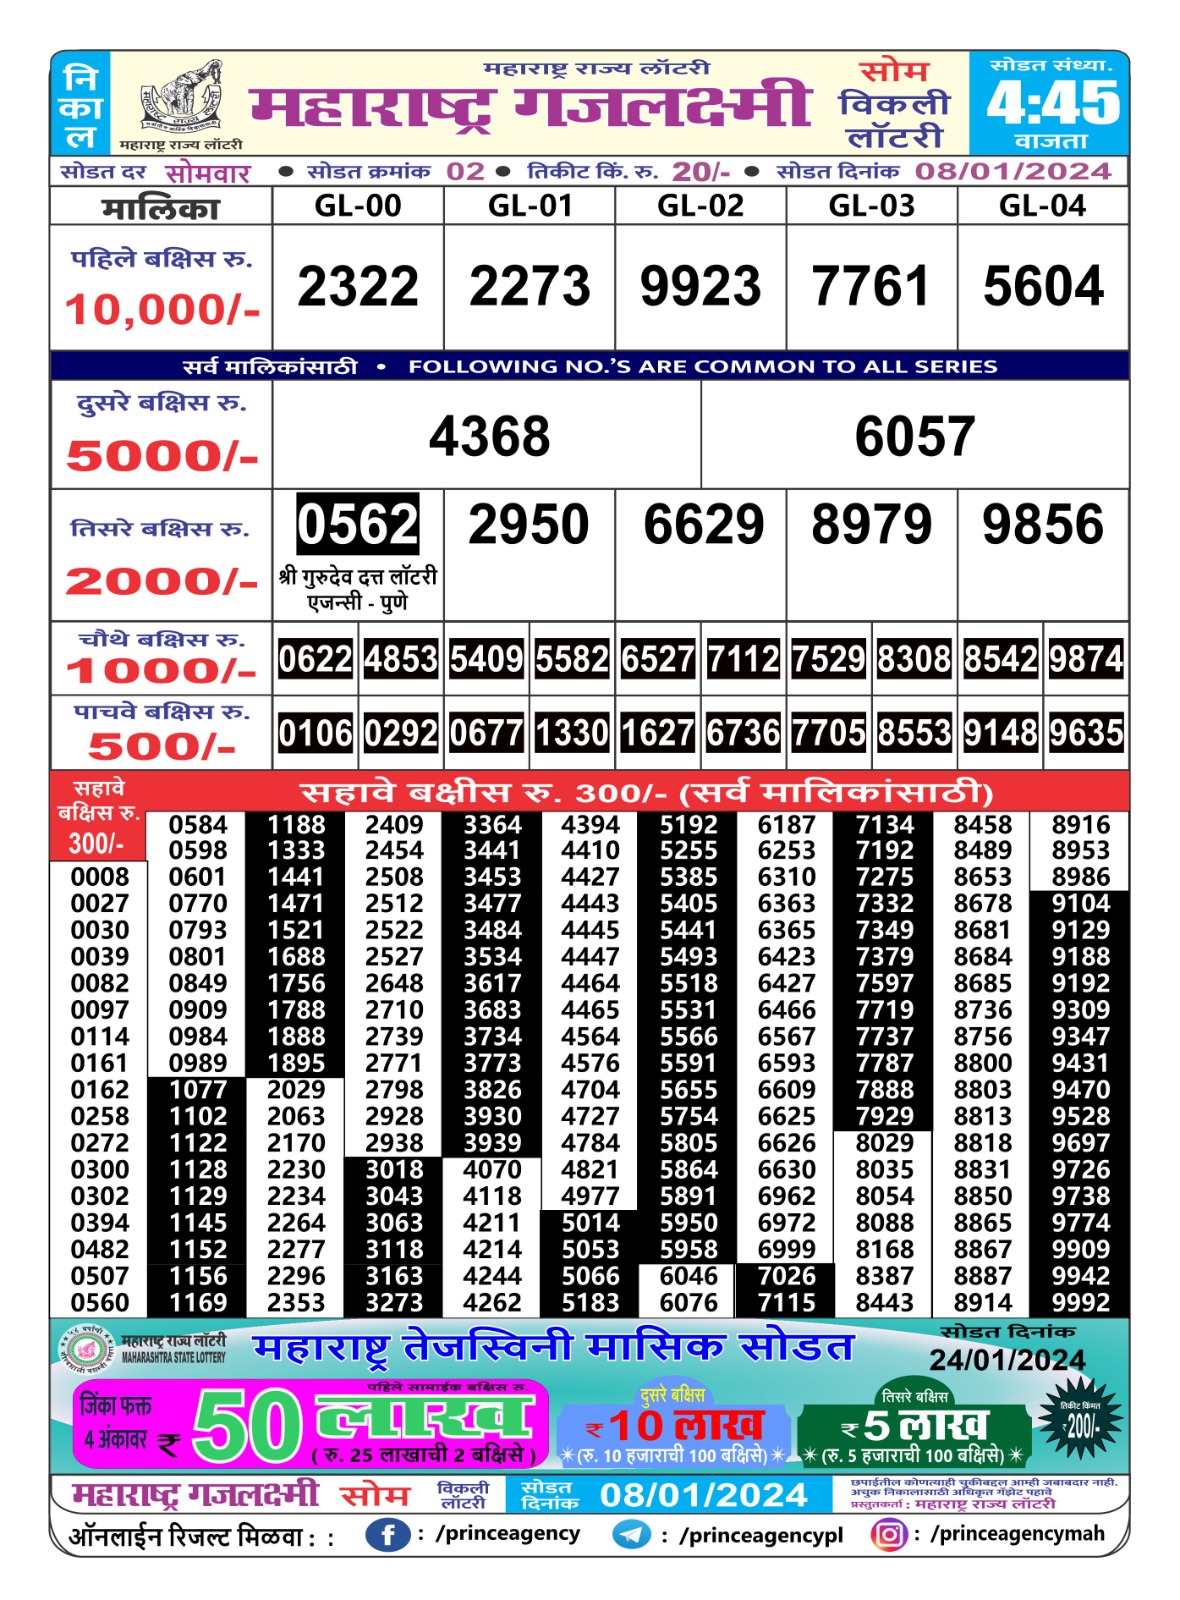 Rajshree 20 shukra Weekly Lottery result 08.09.2023 – All State Lottery  Result